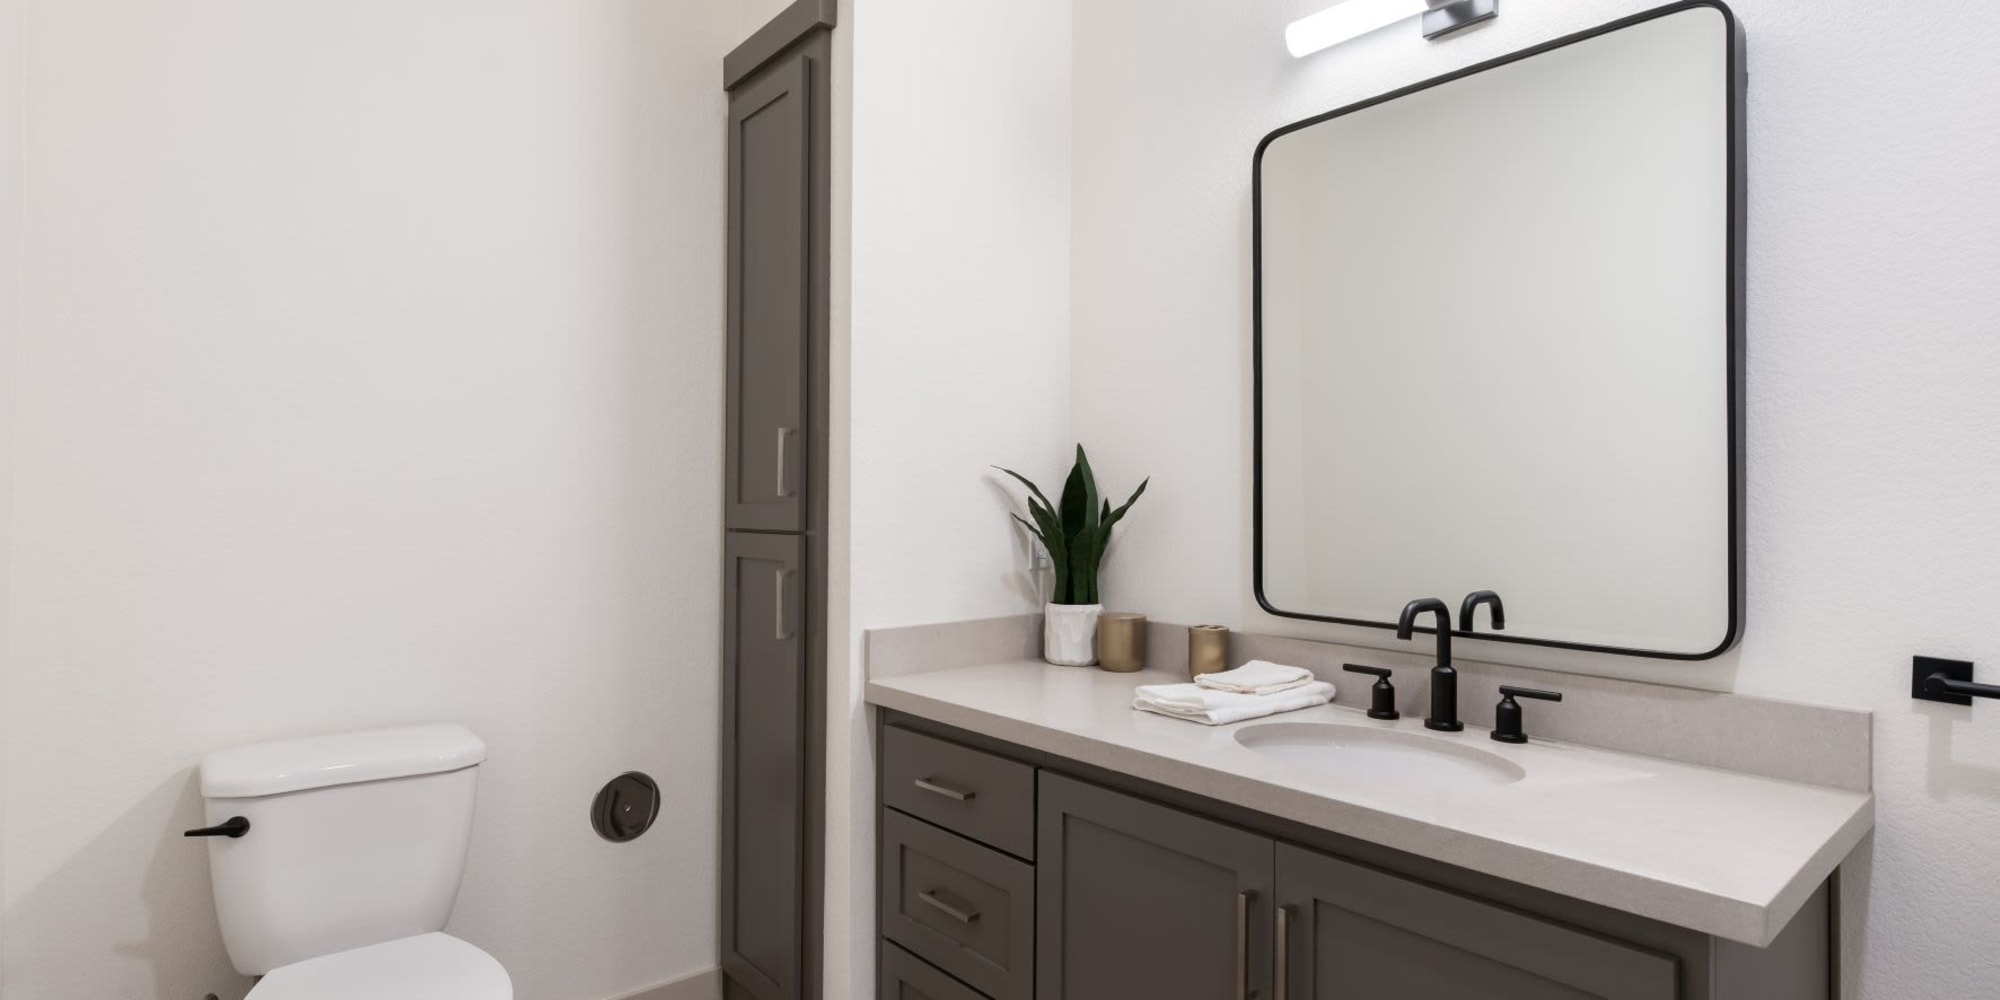 Bathroom with cabinets at Towne Centre Apartments in Lathrop, California